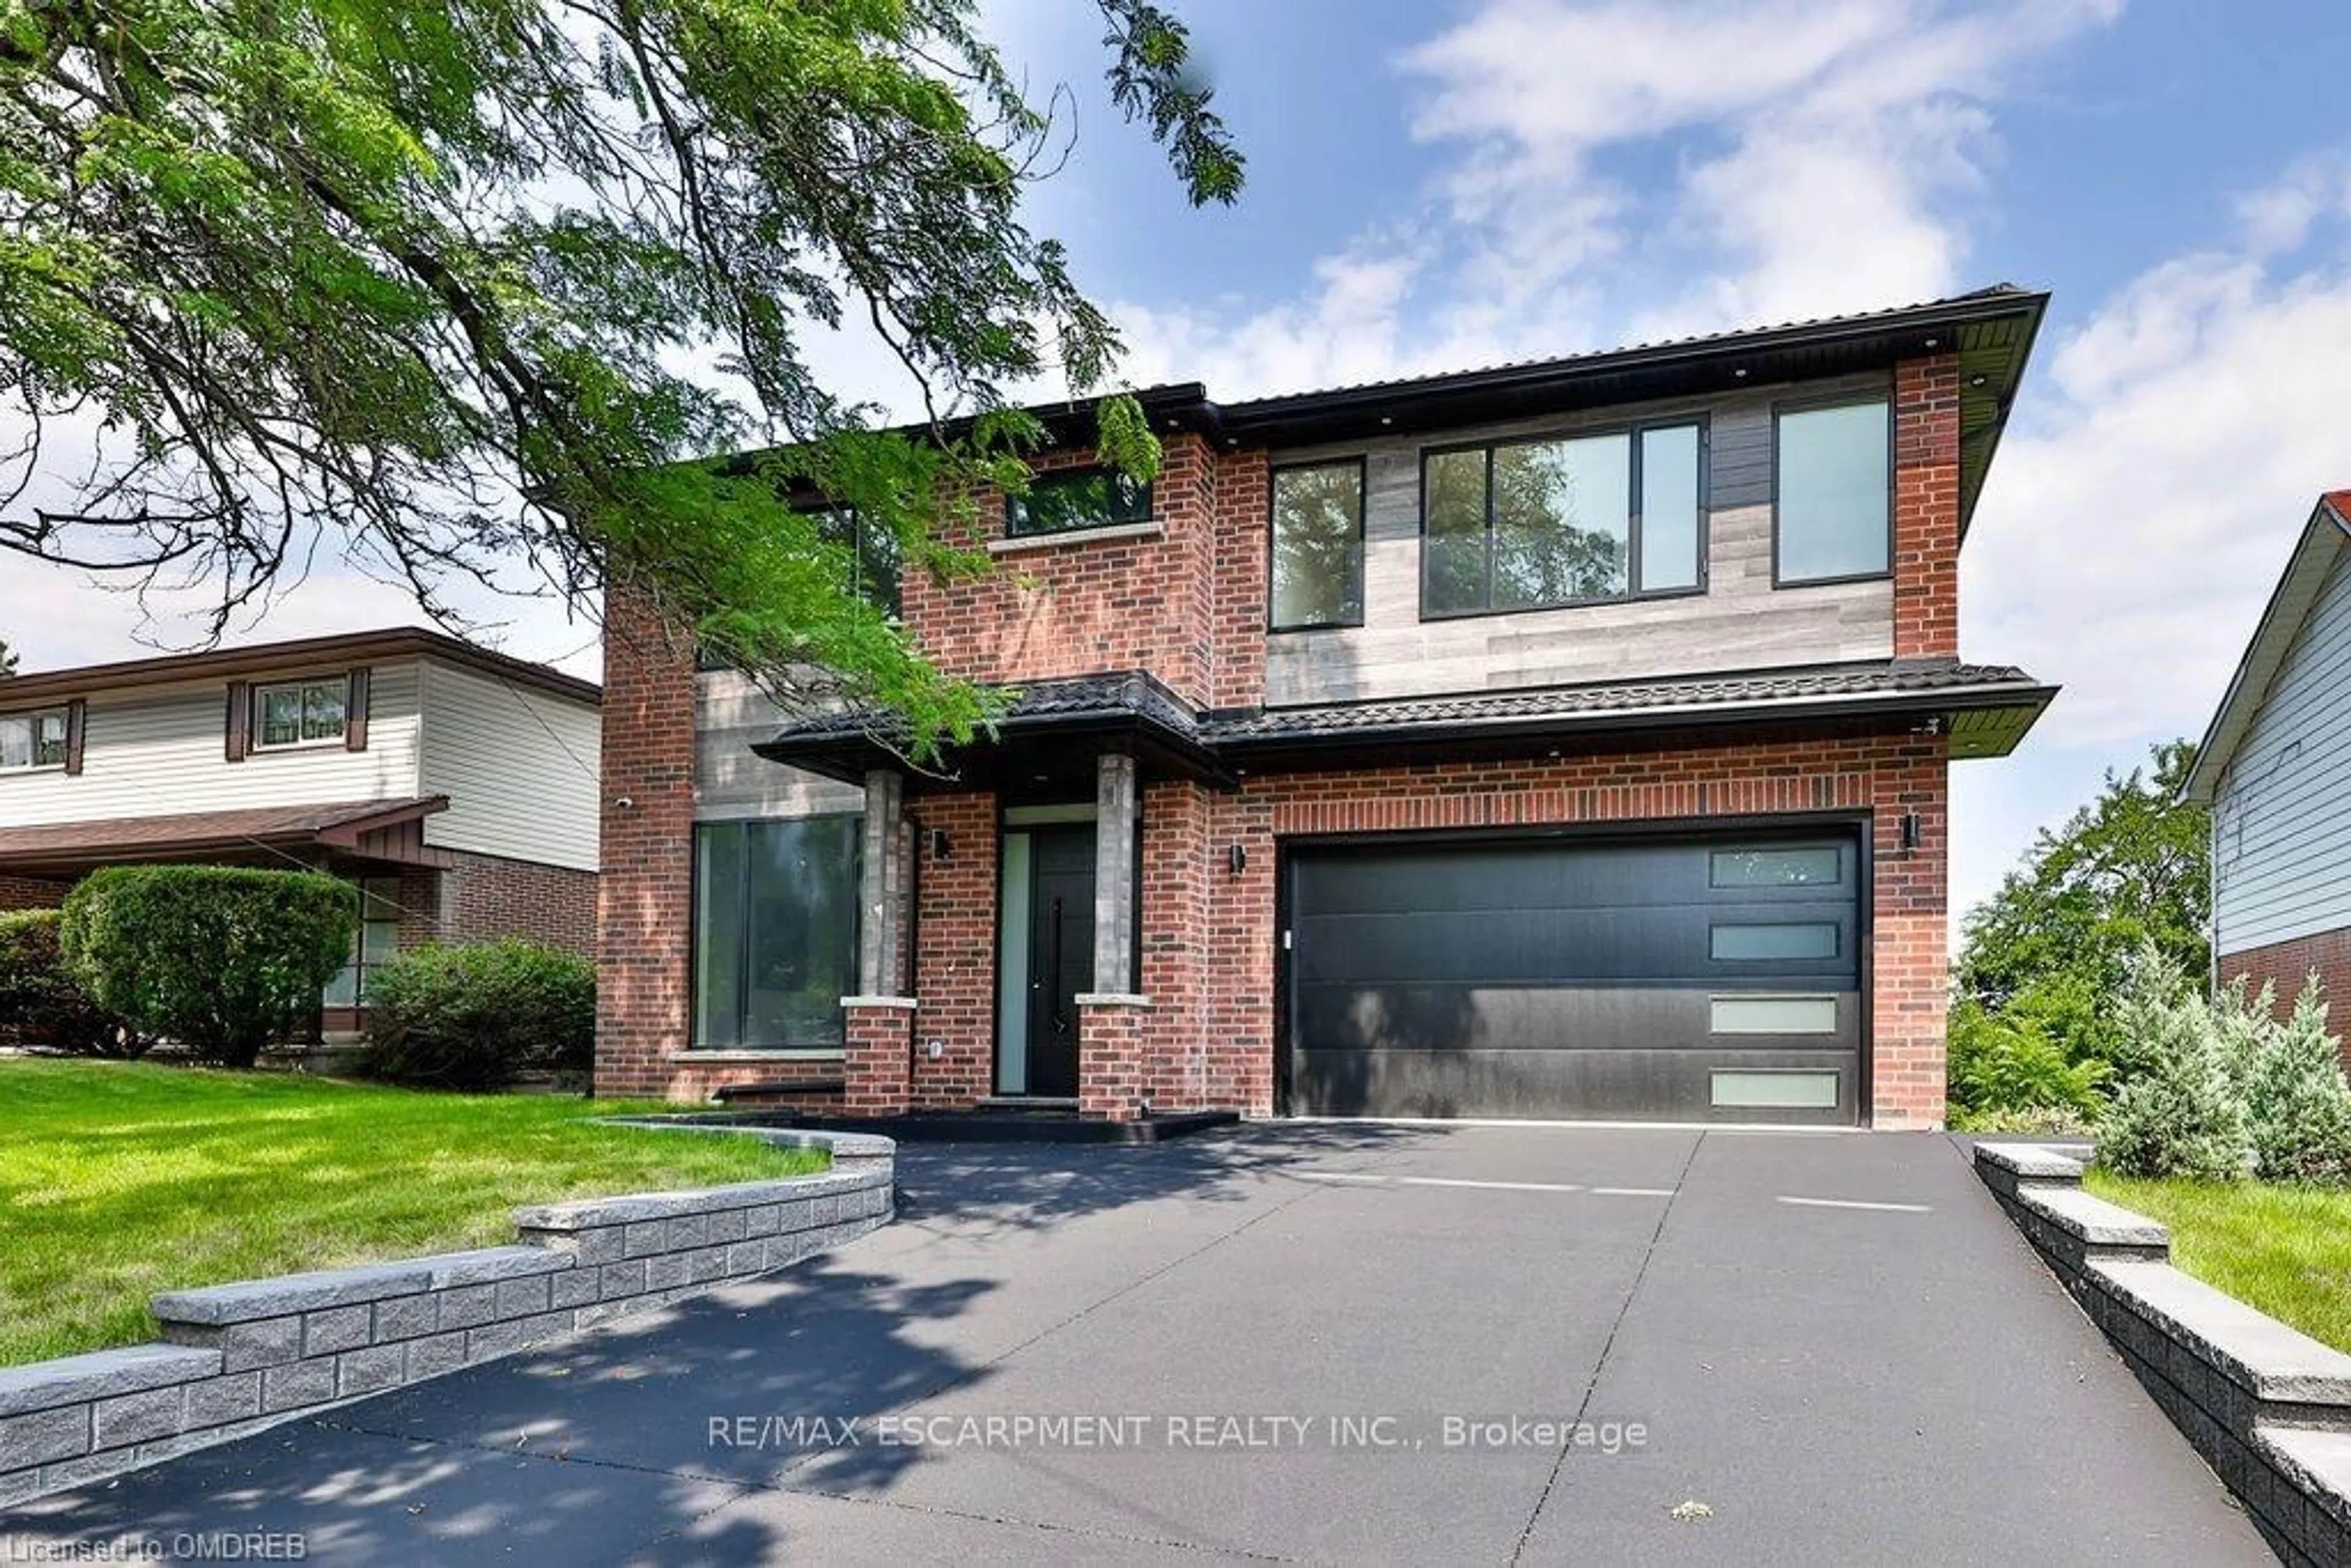 Home with brick exterior material for 1459 Petrie Way, Mississauga Ontario L5J 3Z7